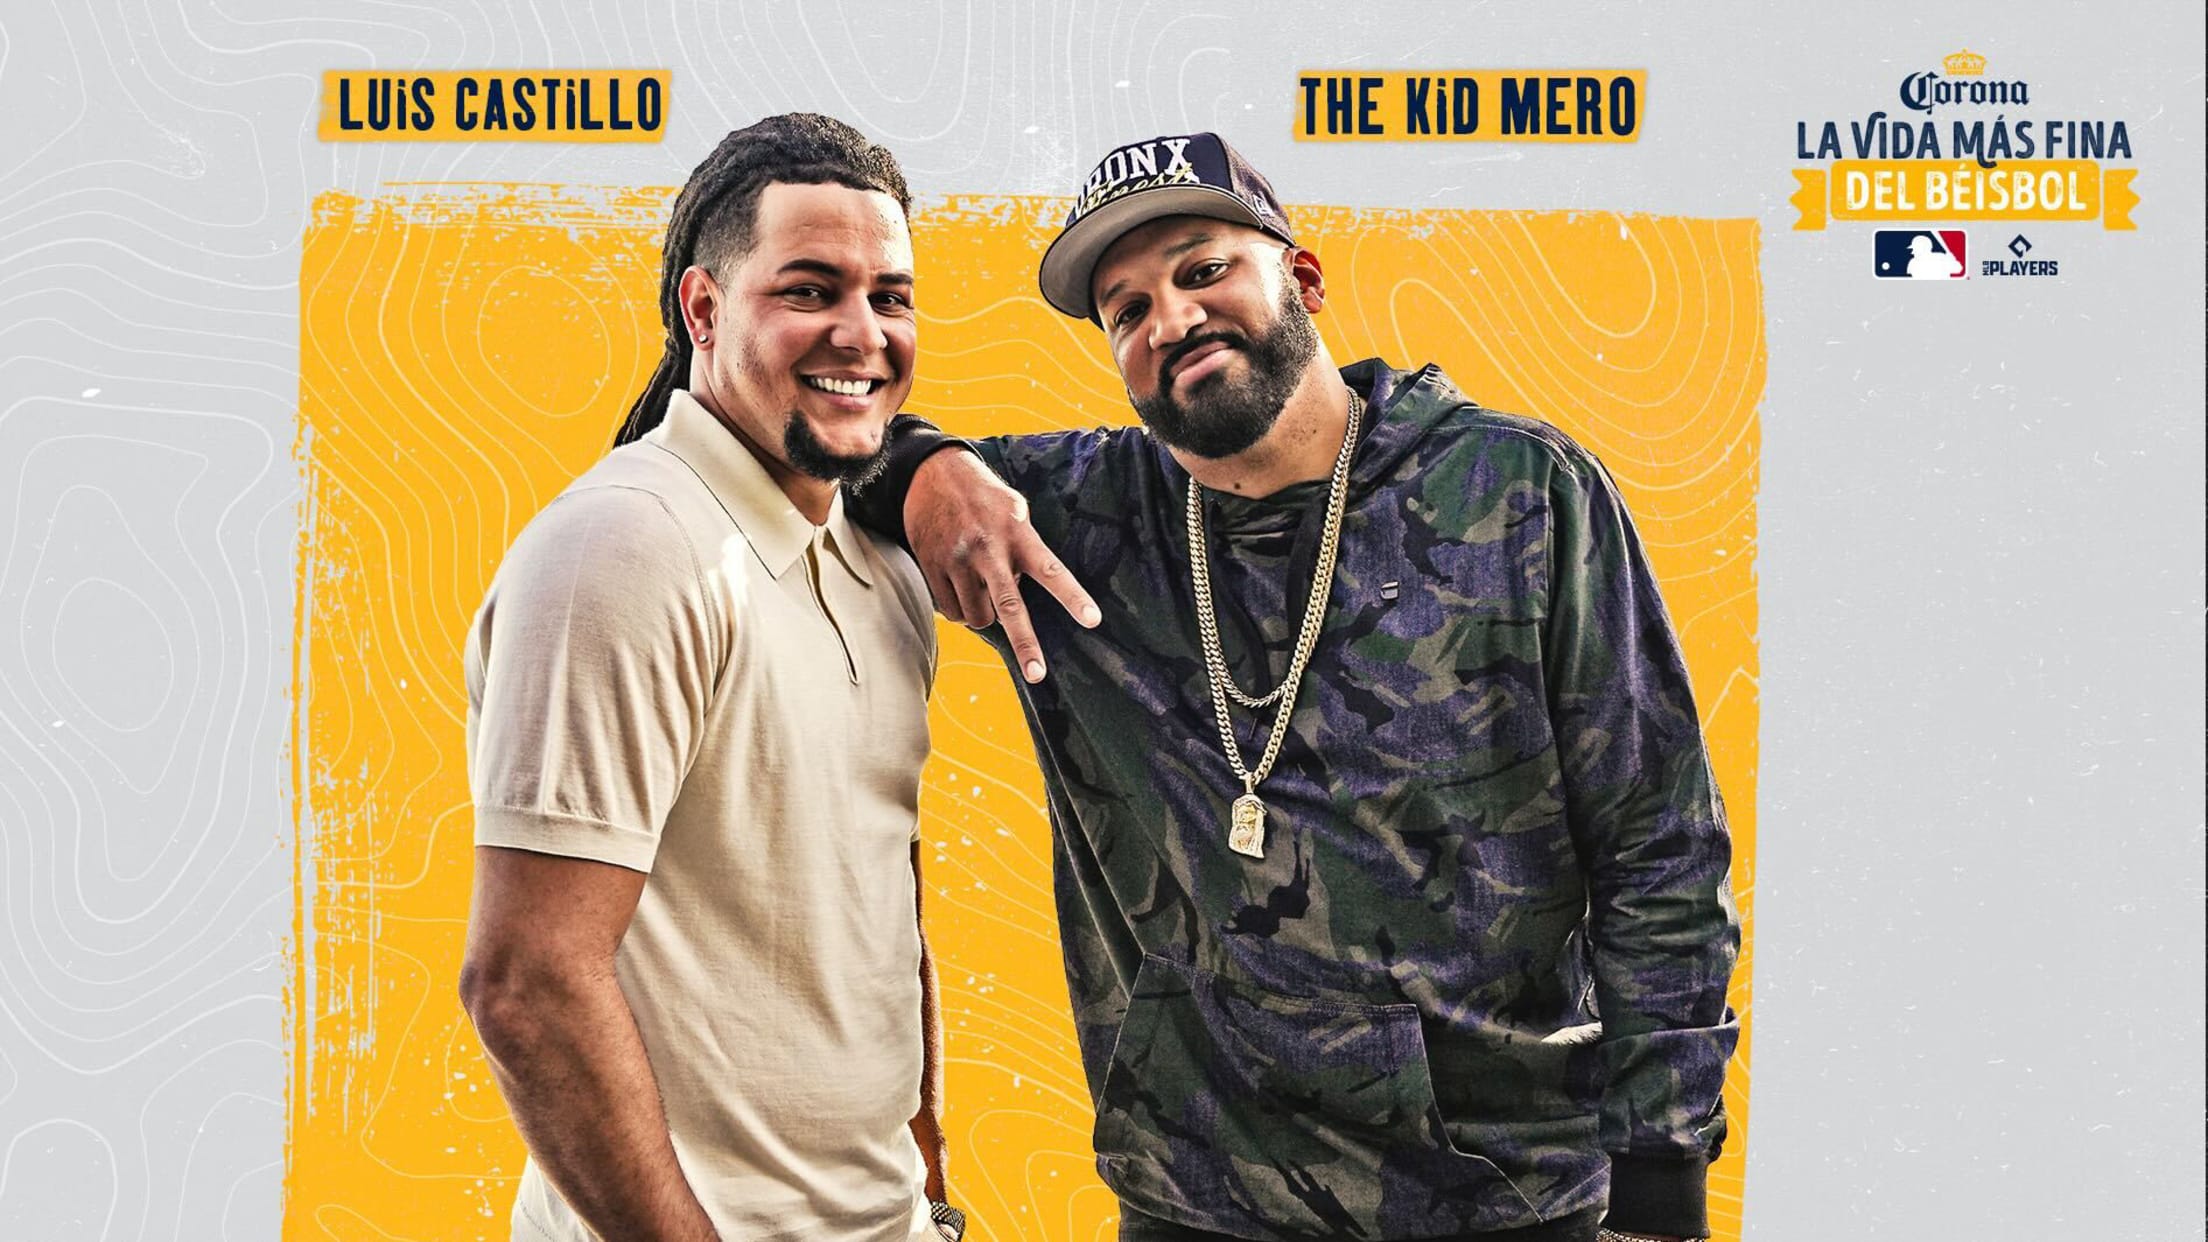 Luis Castillo is pictured with The Kid Mero